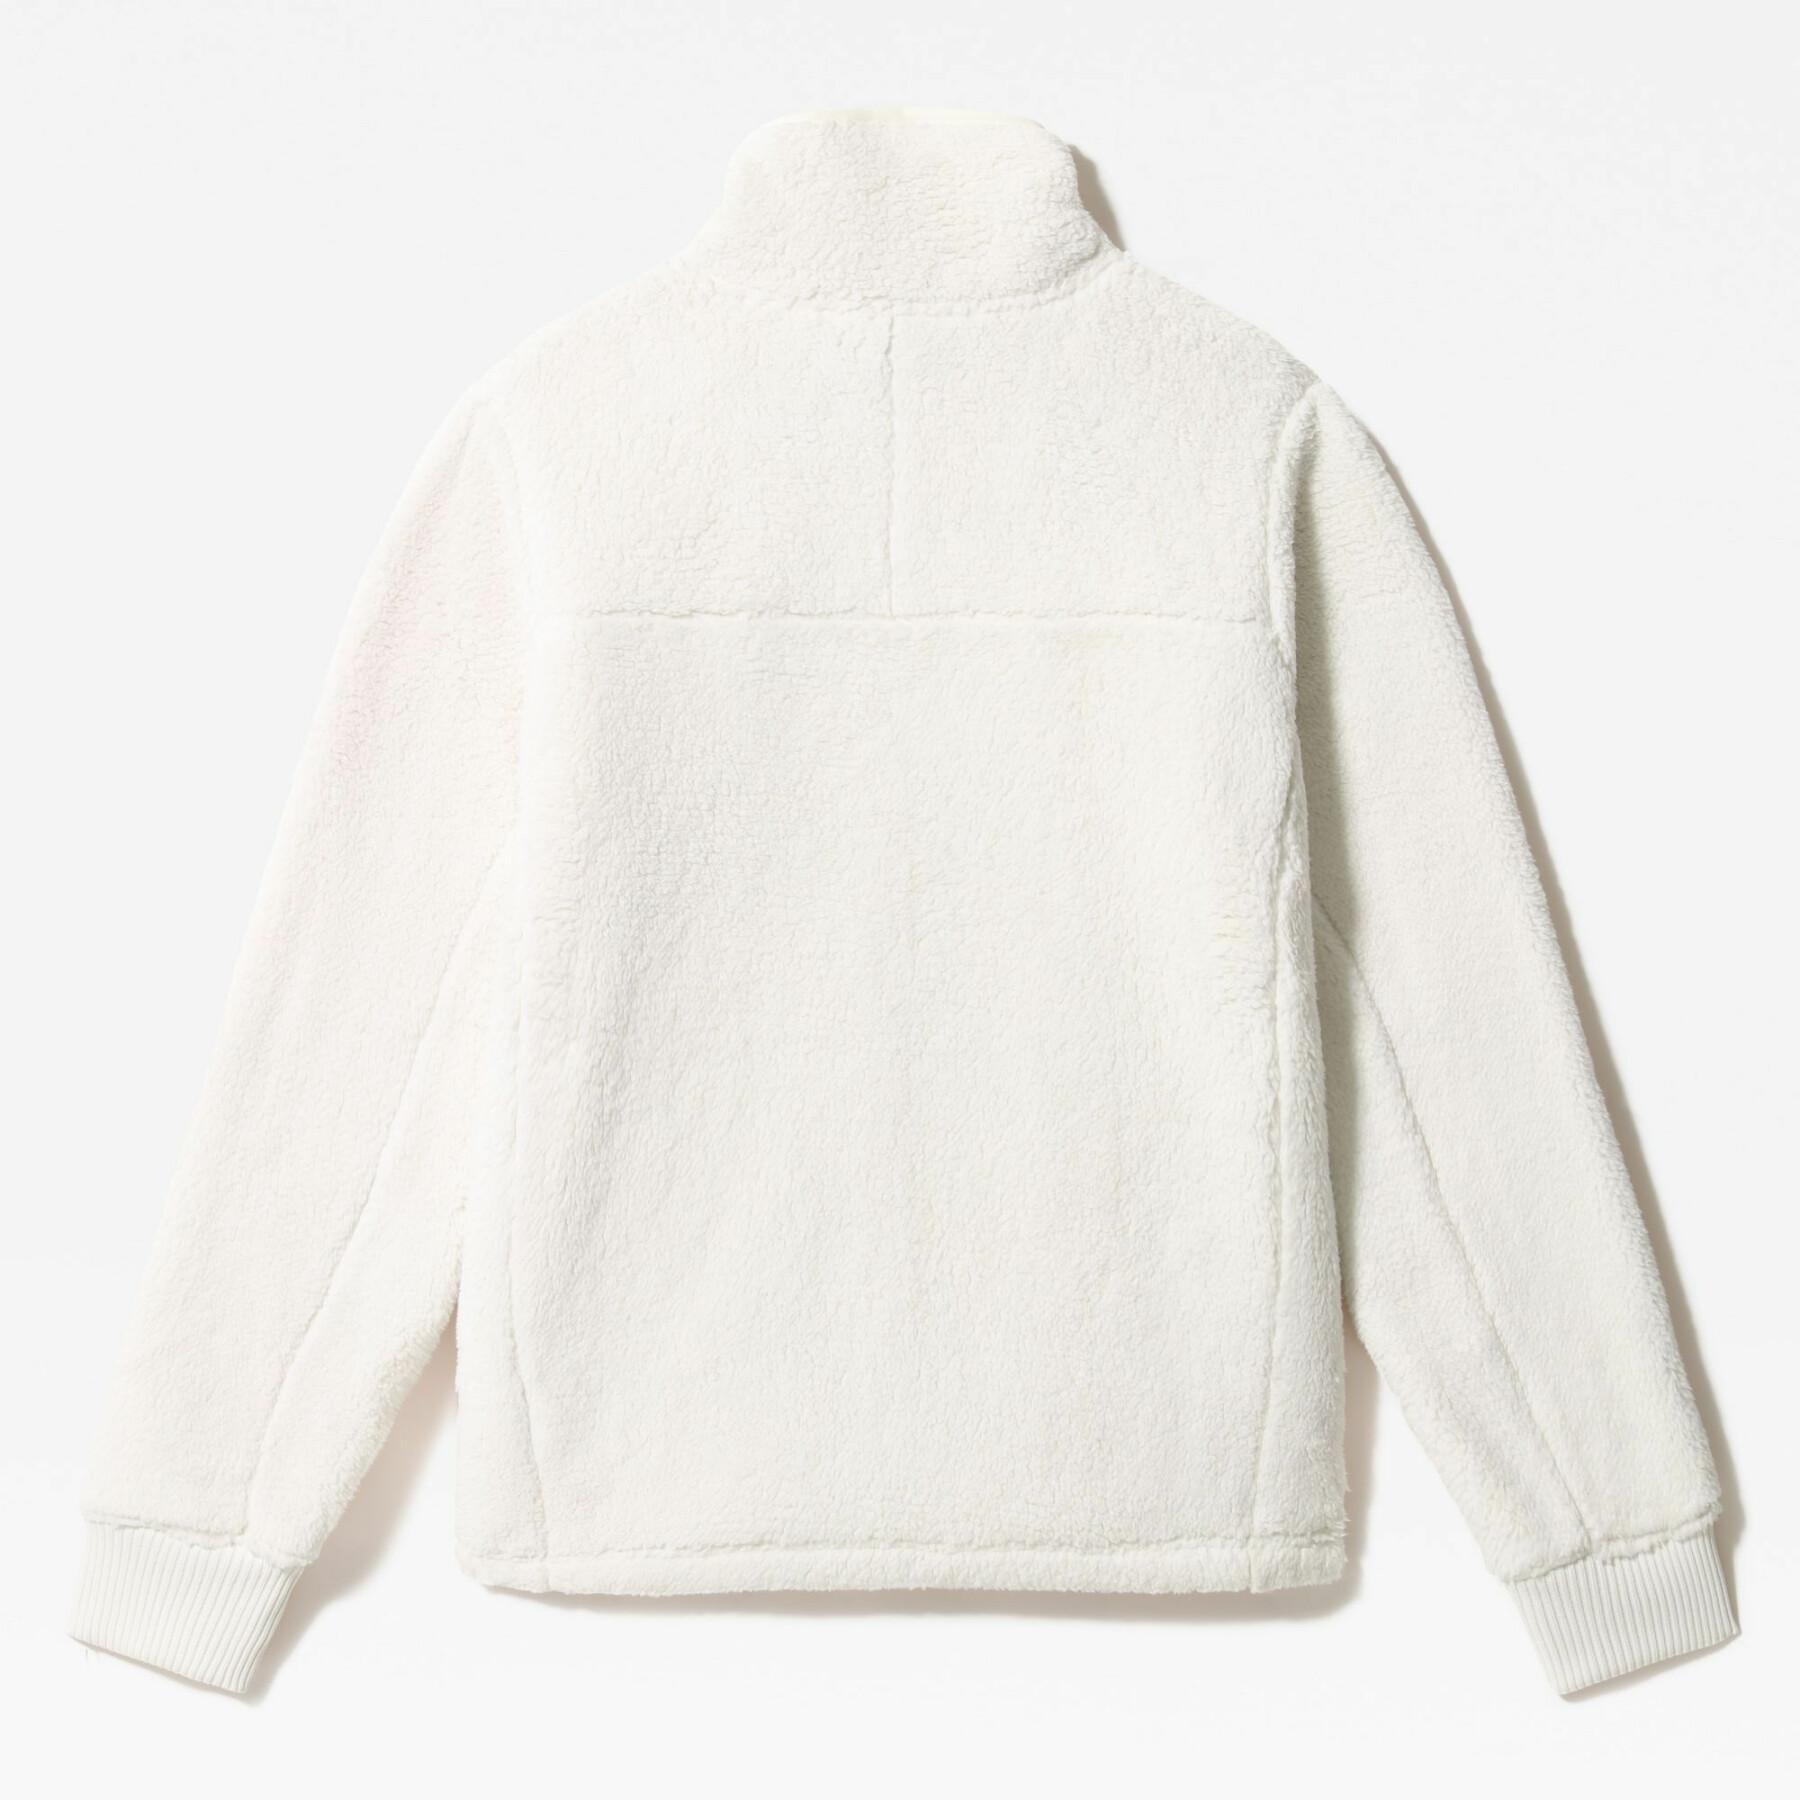 Women's fleece The North Face Campshire